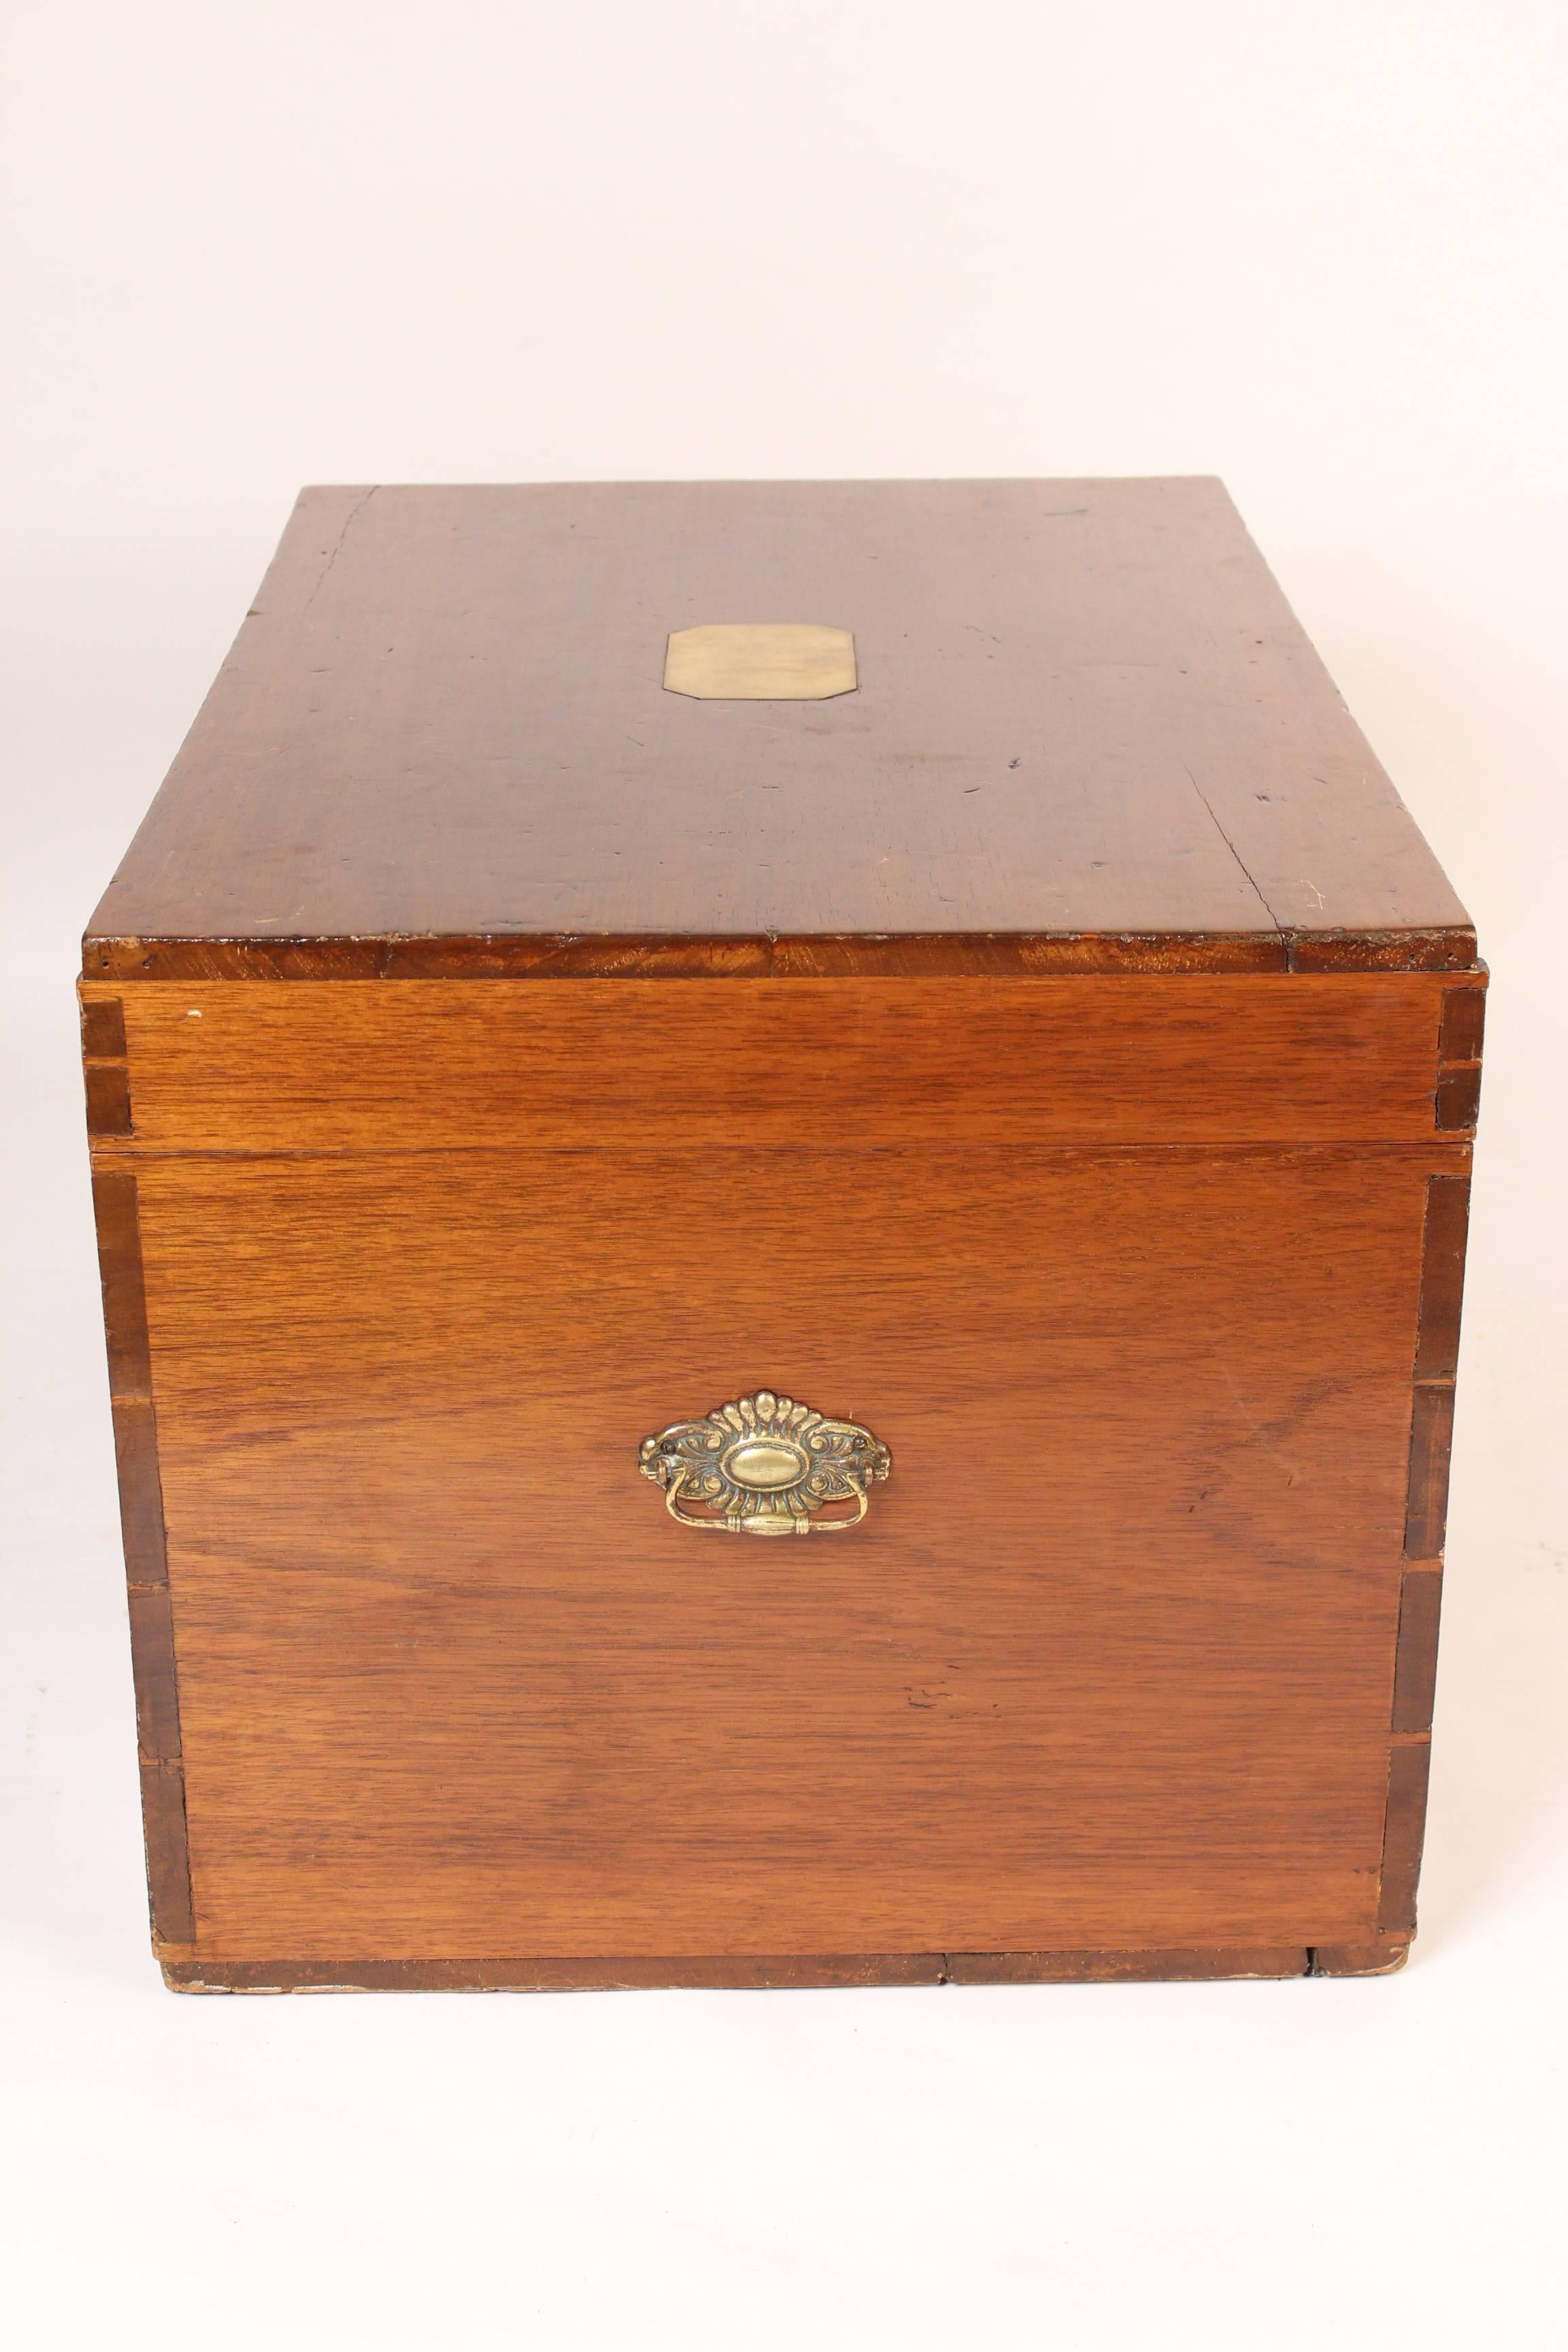 Camphor trunk with brass hardware, circa 1900. This trunk has a brass inlaid top, brass handles on each end and hand dovetailed construction. This trunk would be ideal for either a side table or coffee table.